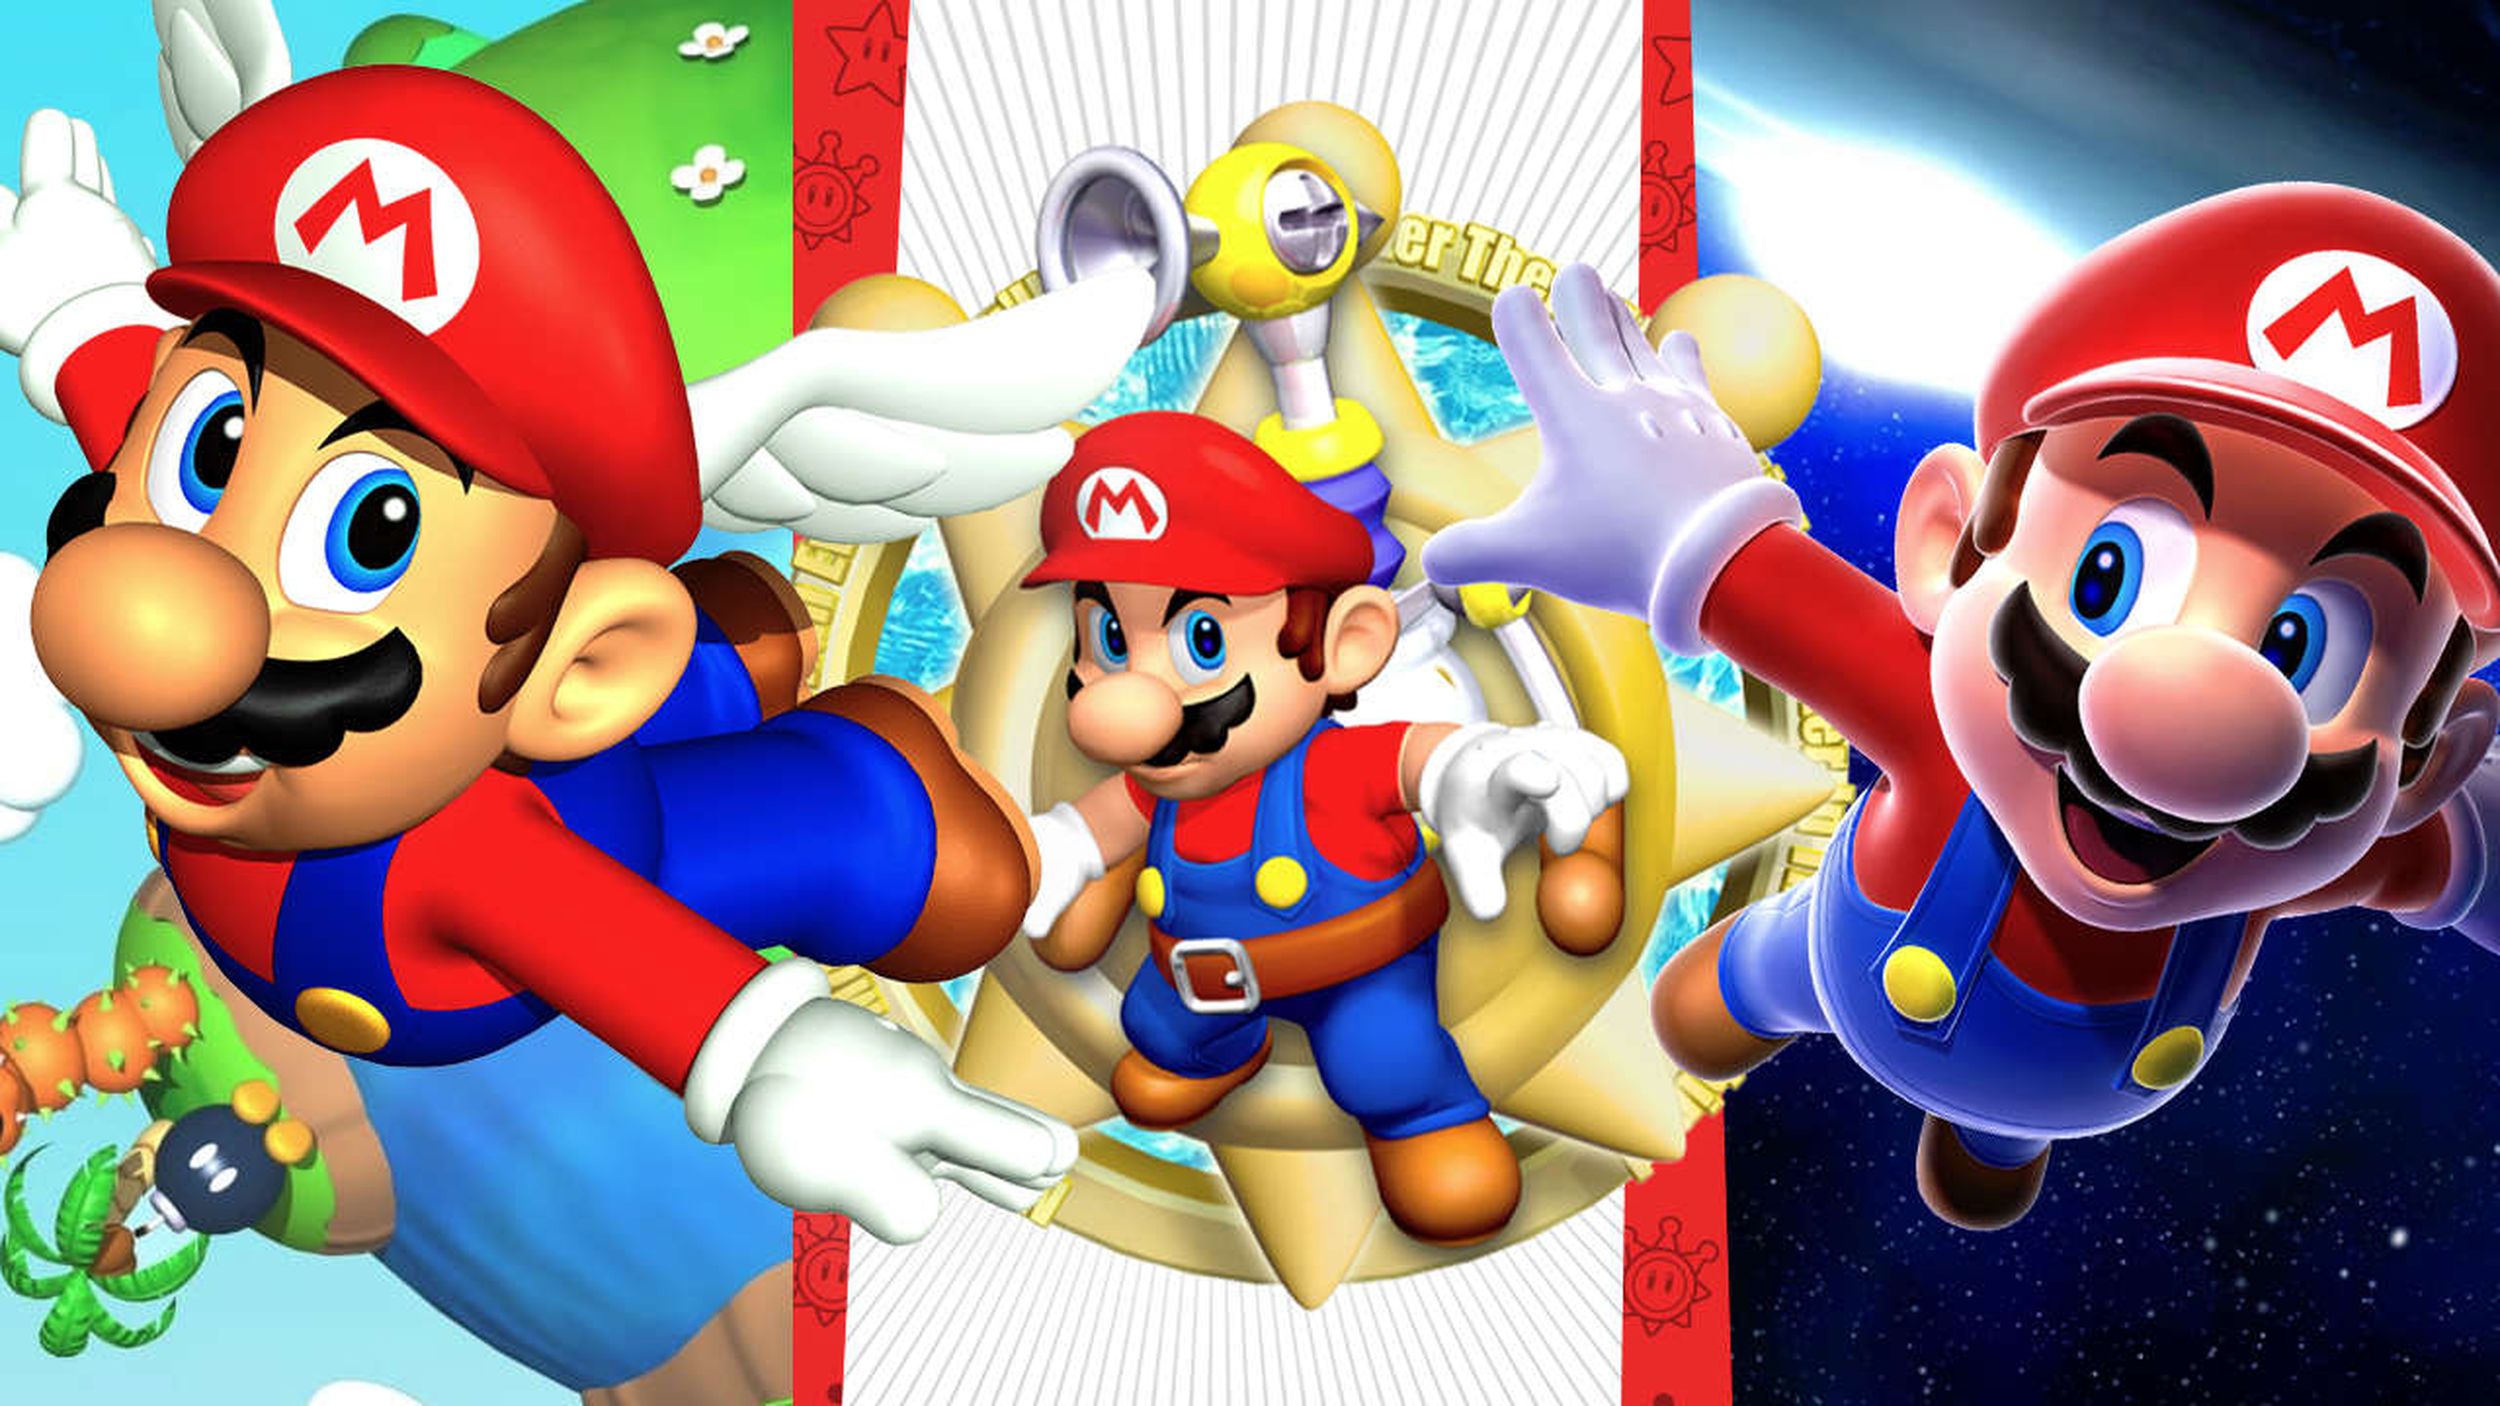 mario games online for free on the world wide web